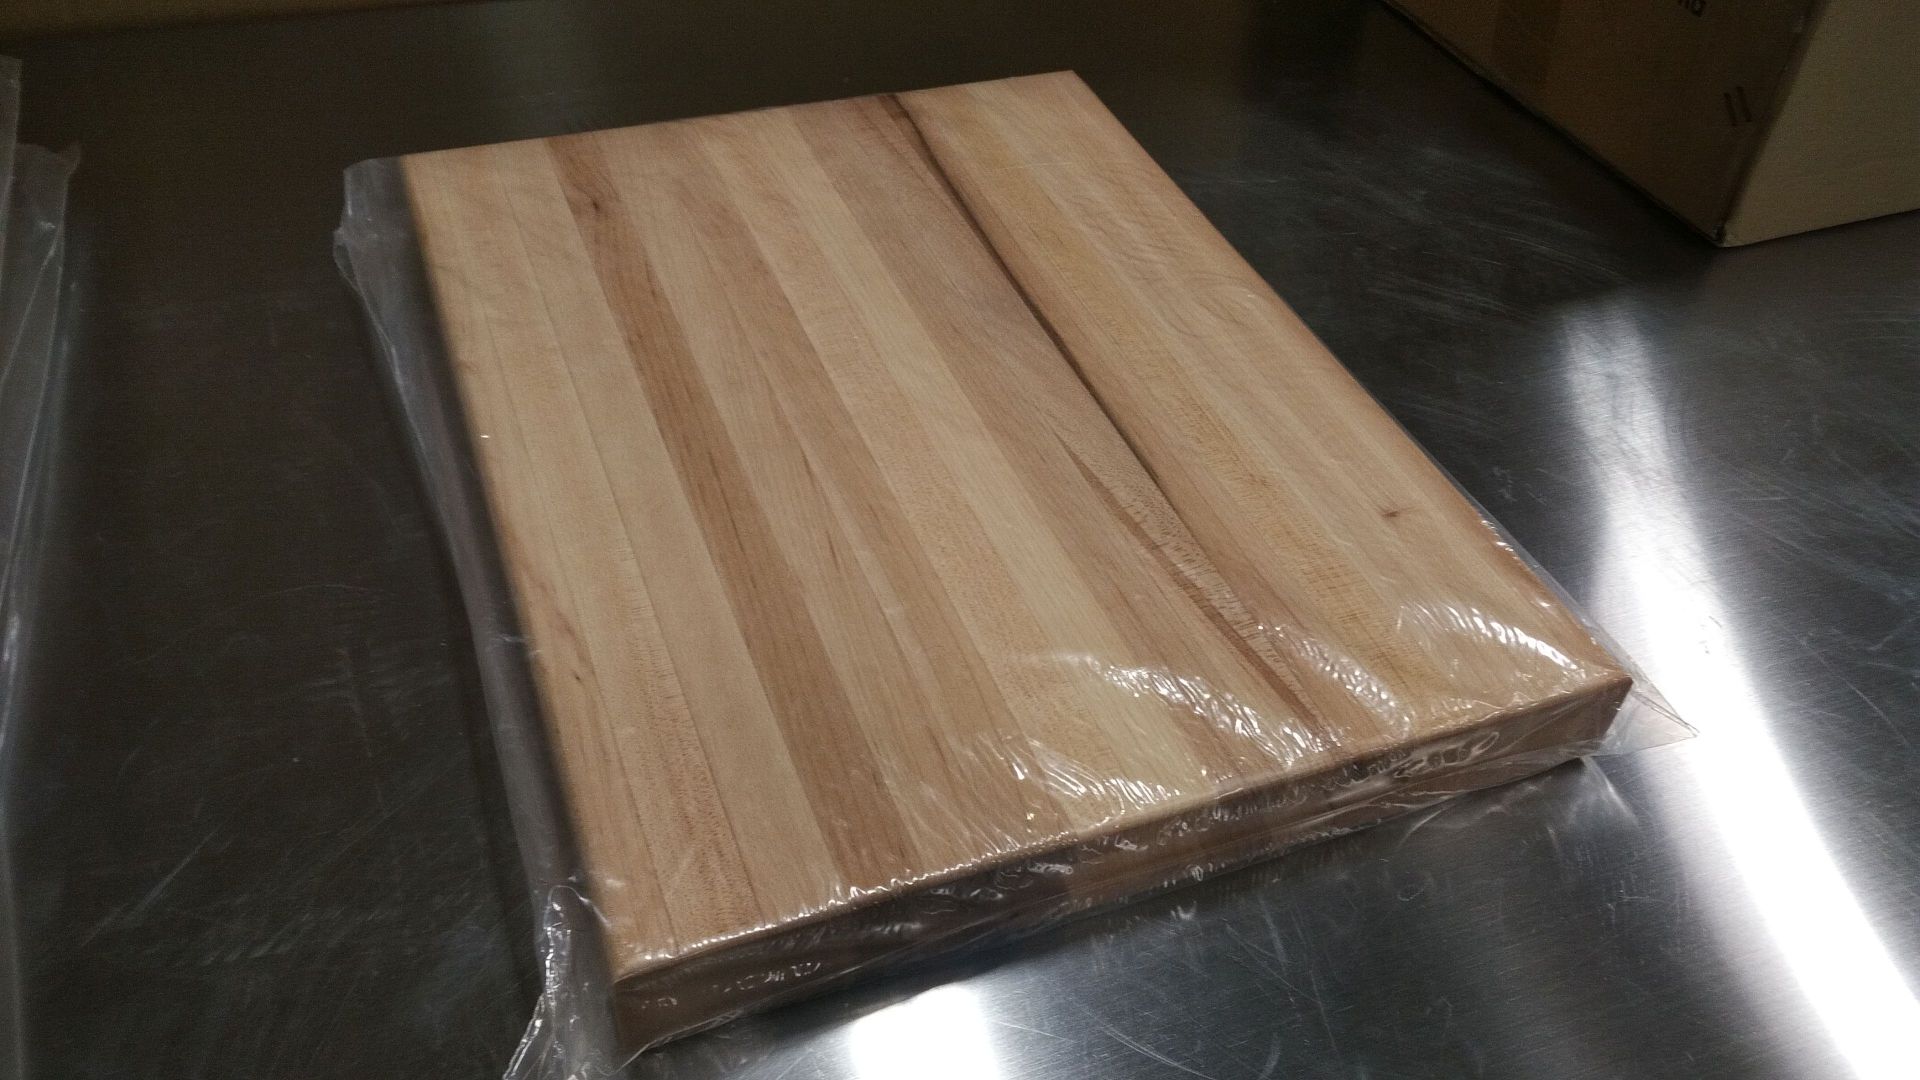 16" x 12" x 1.5" Hard Canadian Maple Carving Board